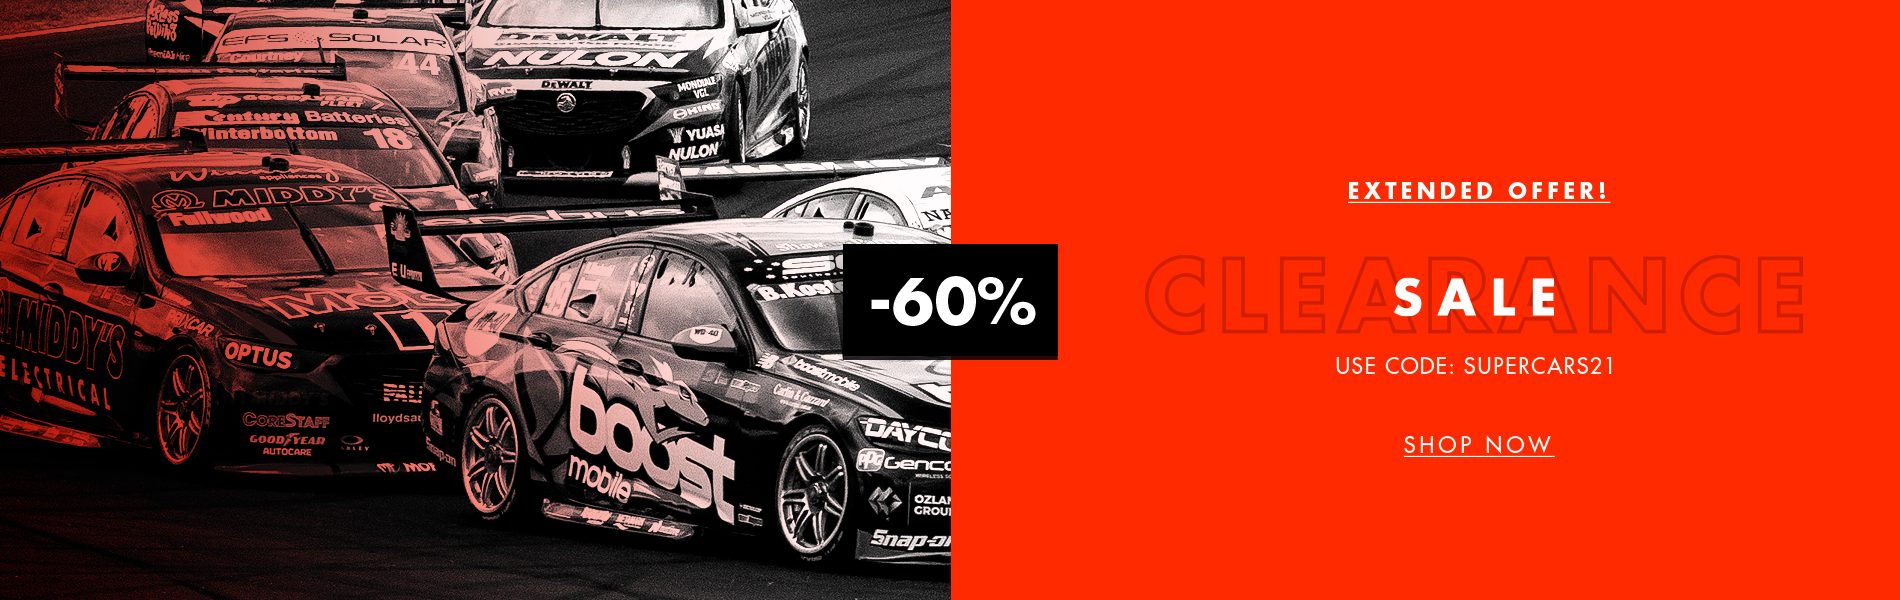 2021-Supercars-teams-clearance-sale-homepage-SS-EO